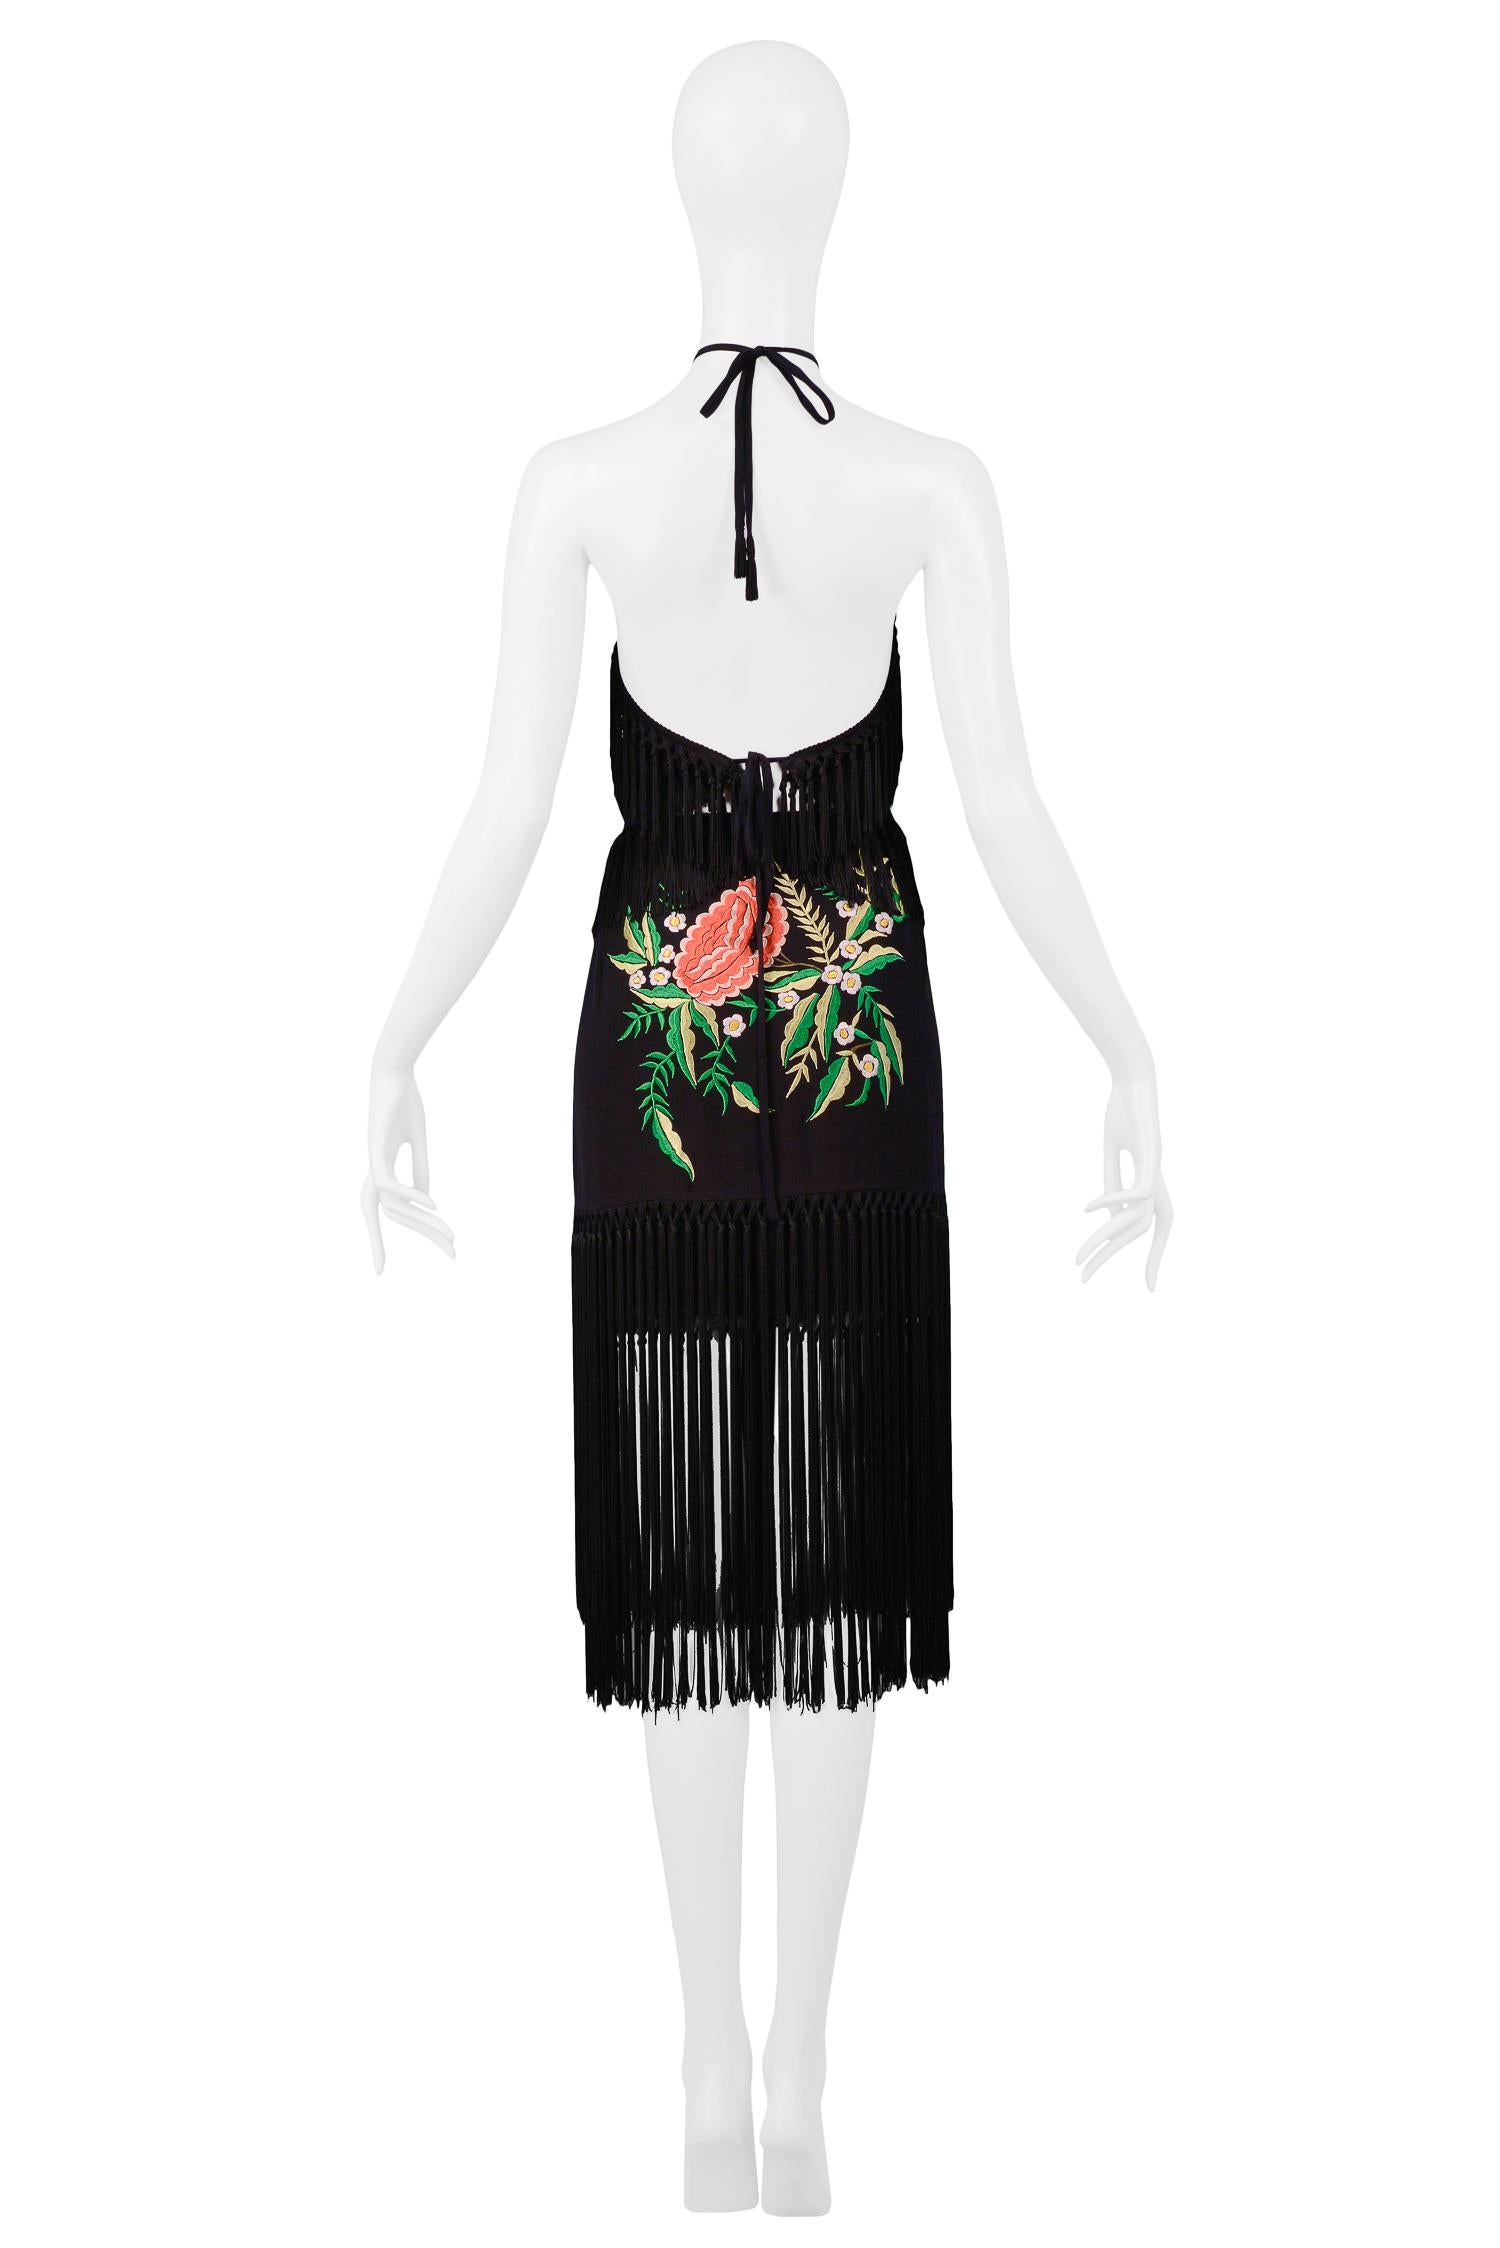 Women's Vintage Moschino Black Embroidered Floral Halter Top & Skirt Ensemble